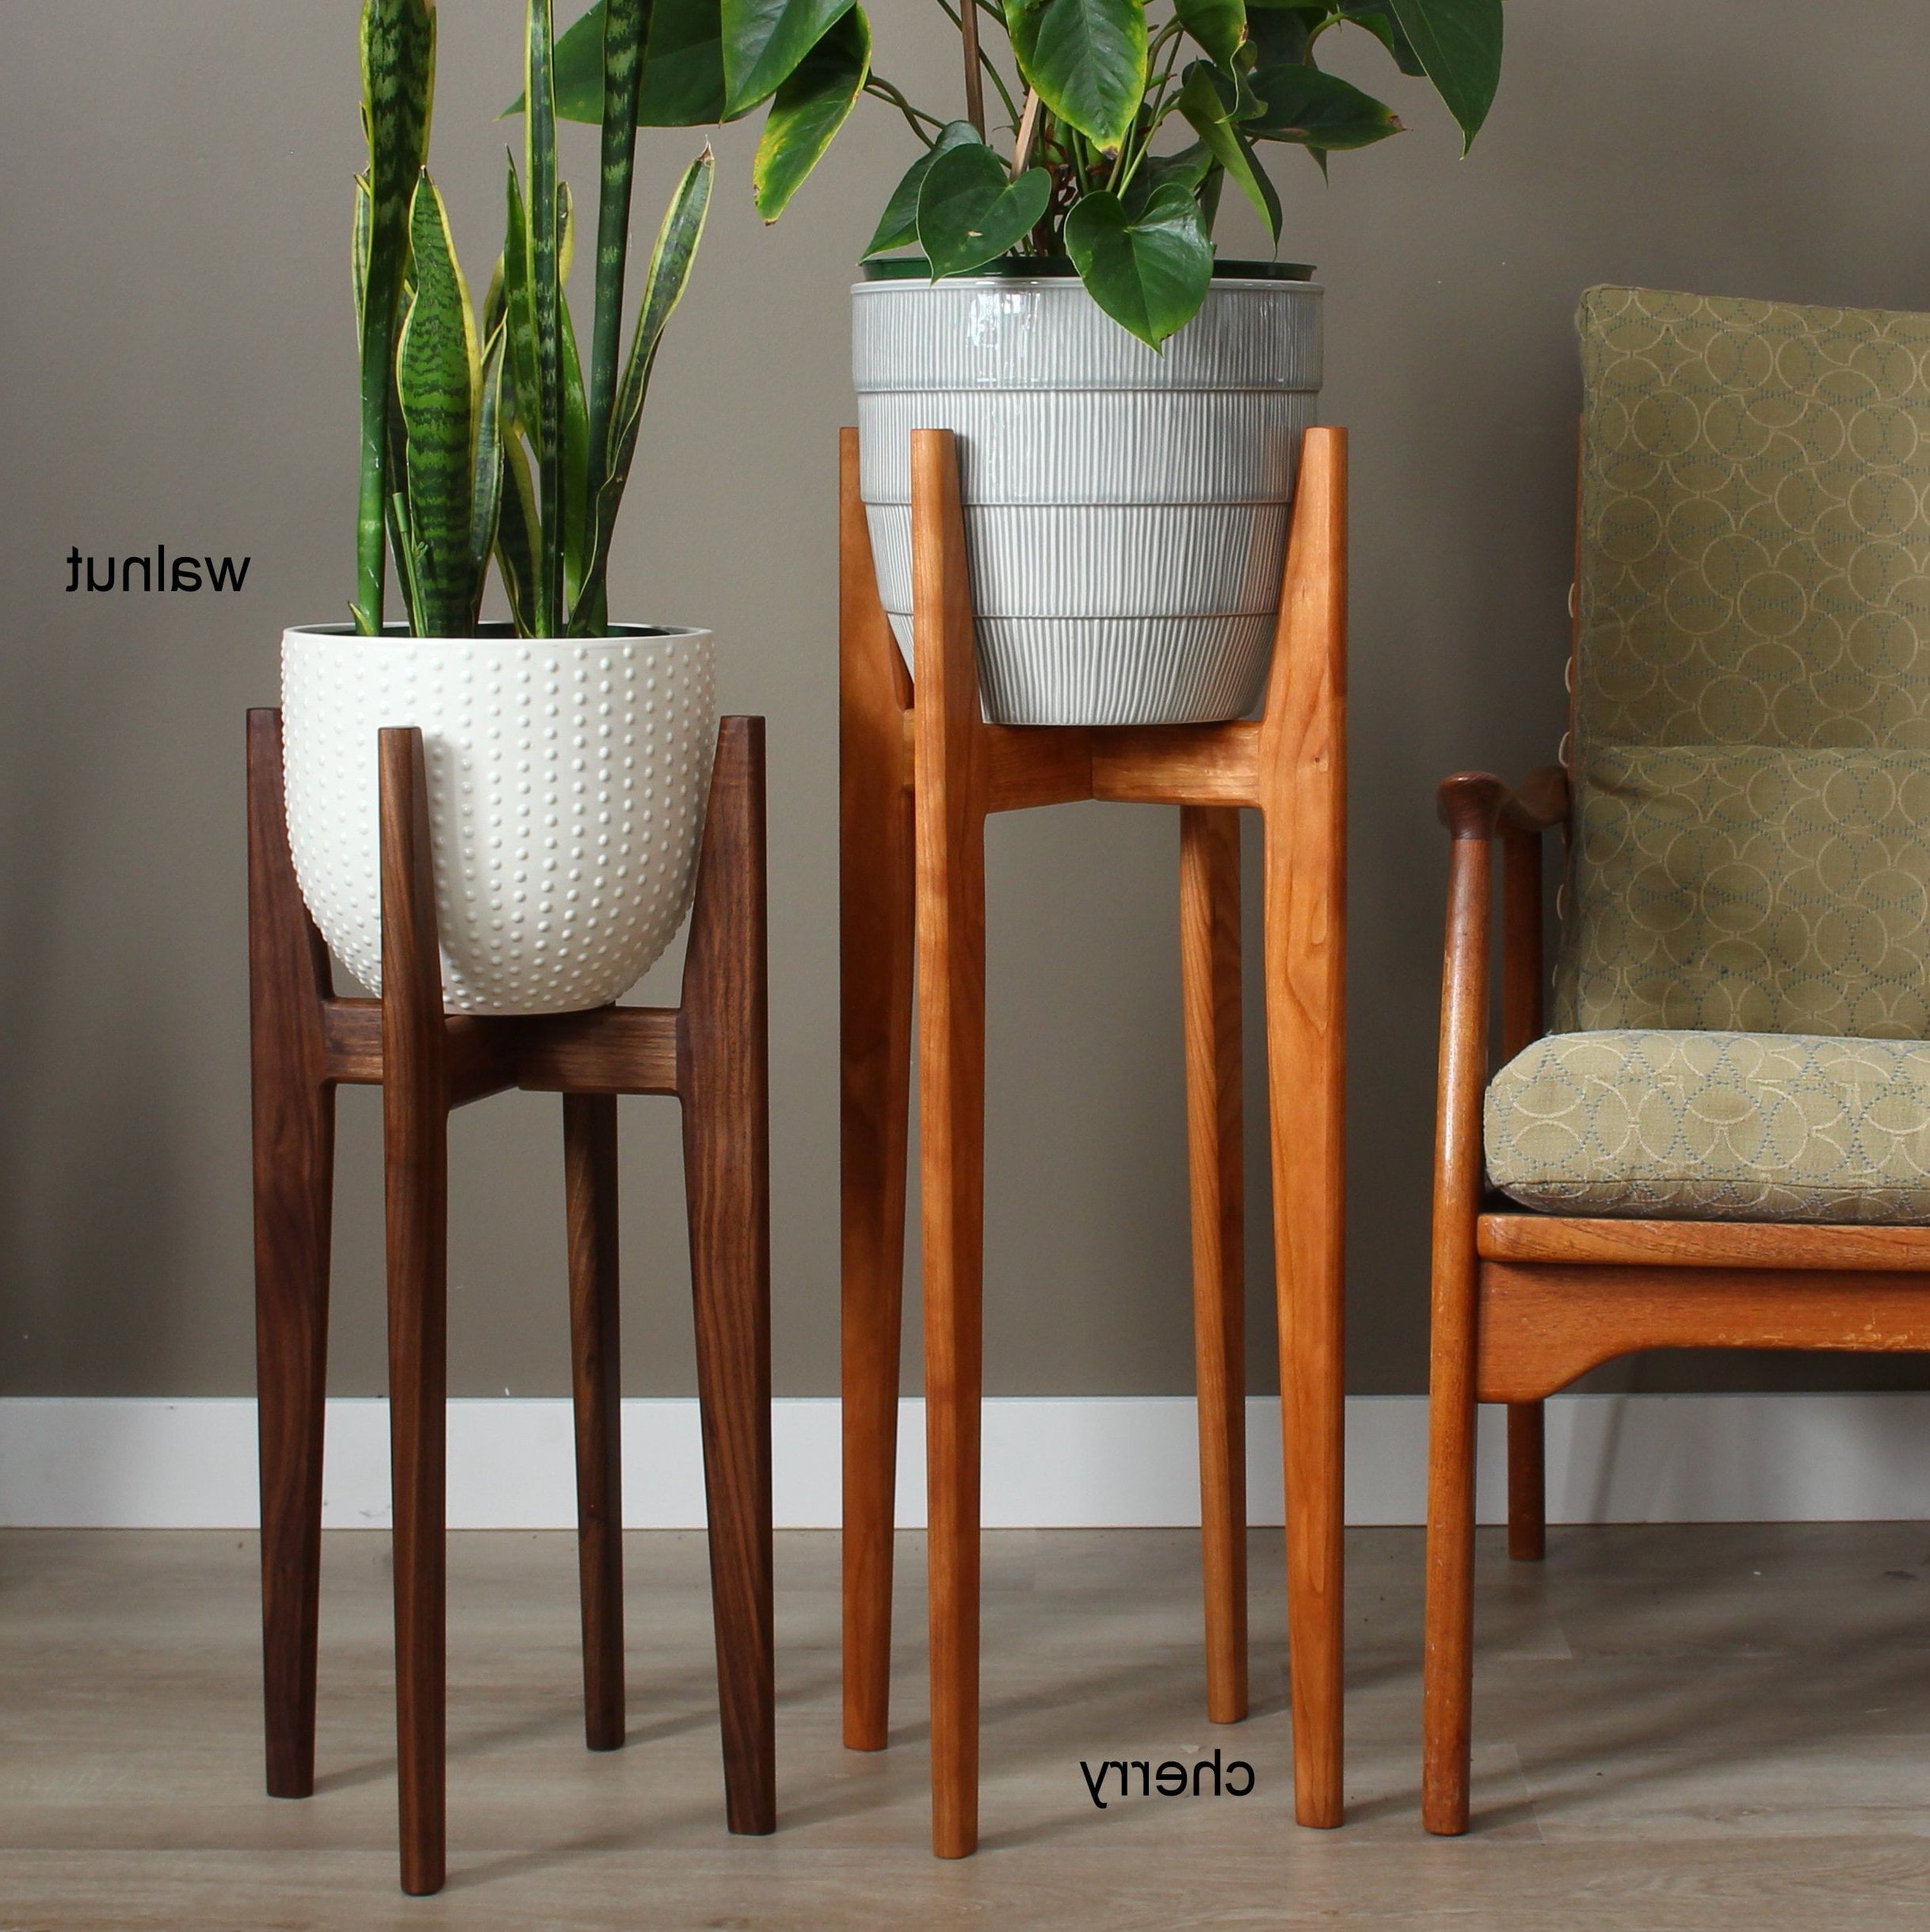 Preferred Mid Century Modern Plant Stand Our Original Design Indoor – Etsy Throughout Wood Plant Stands (View 2 of 15)